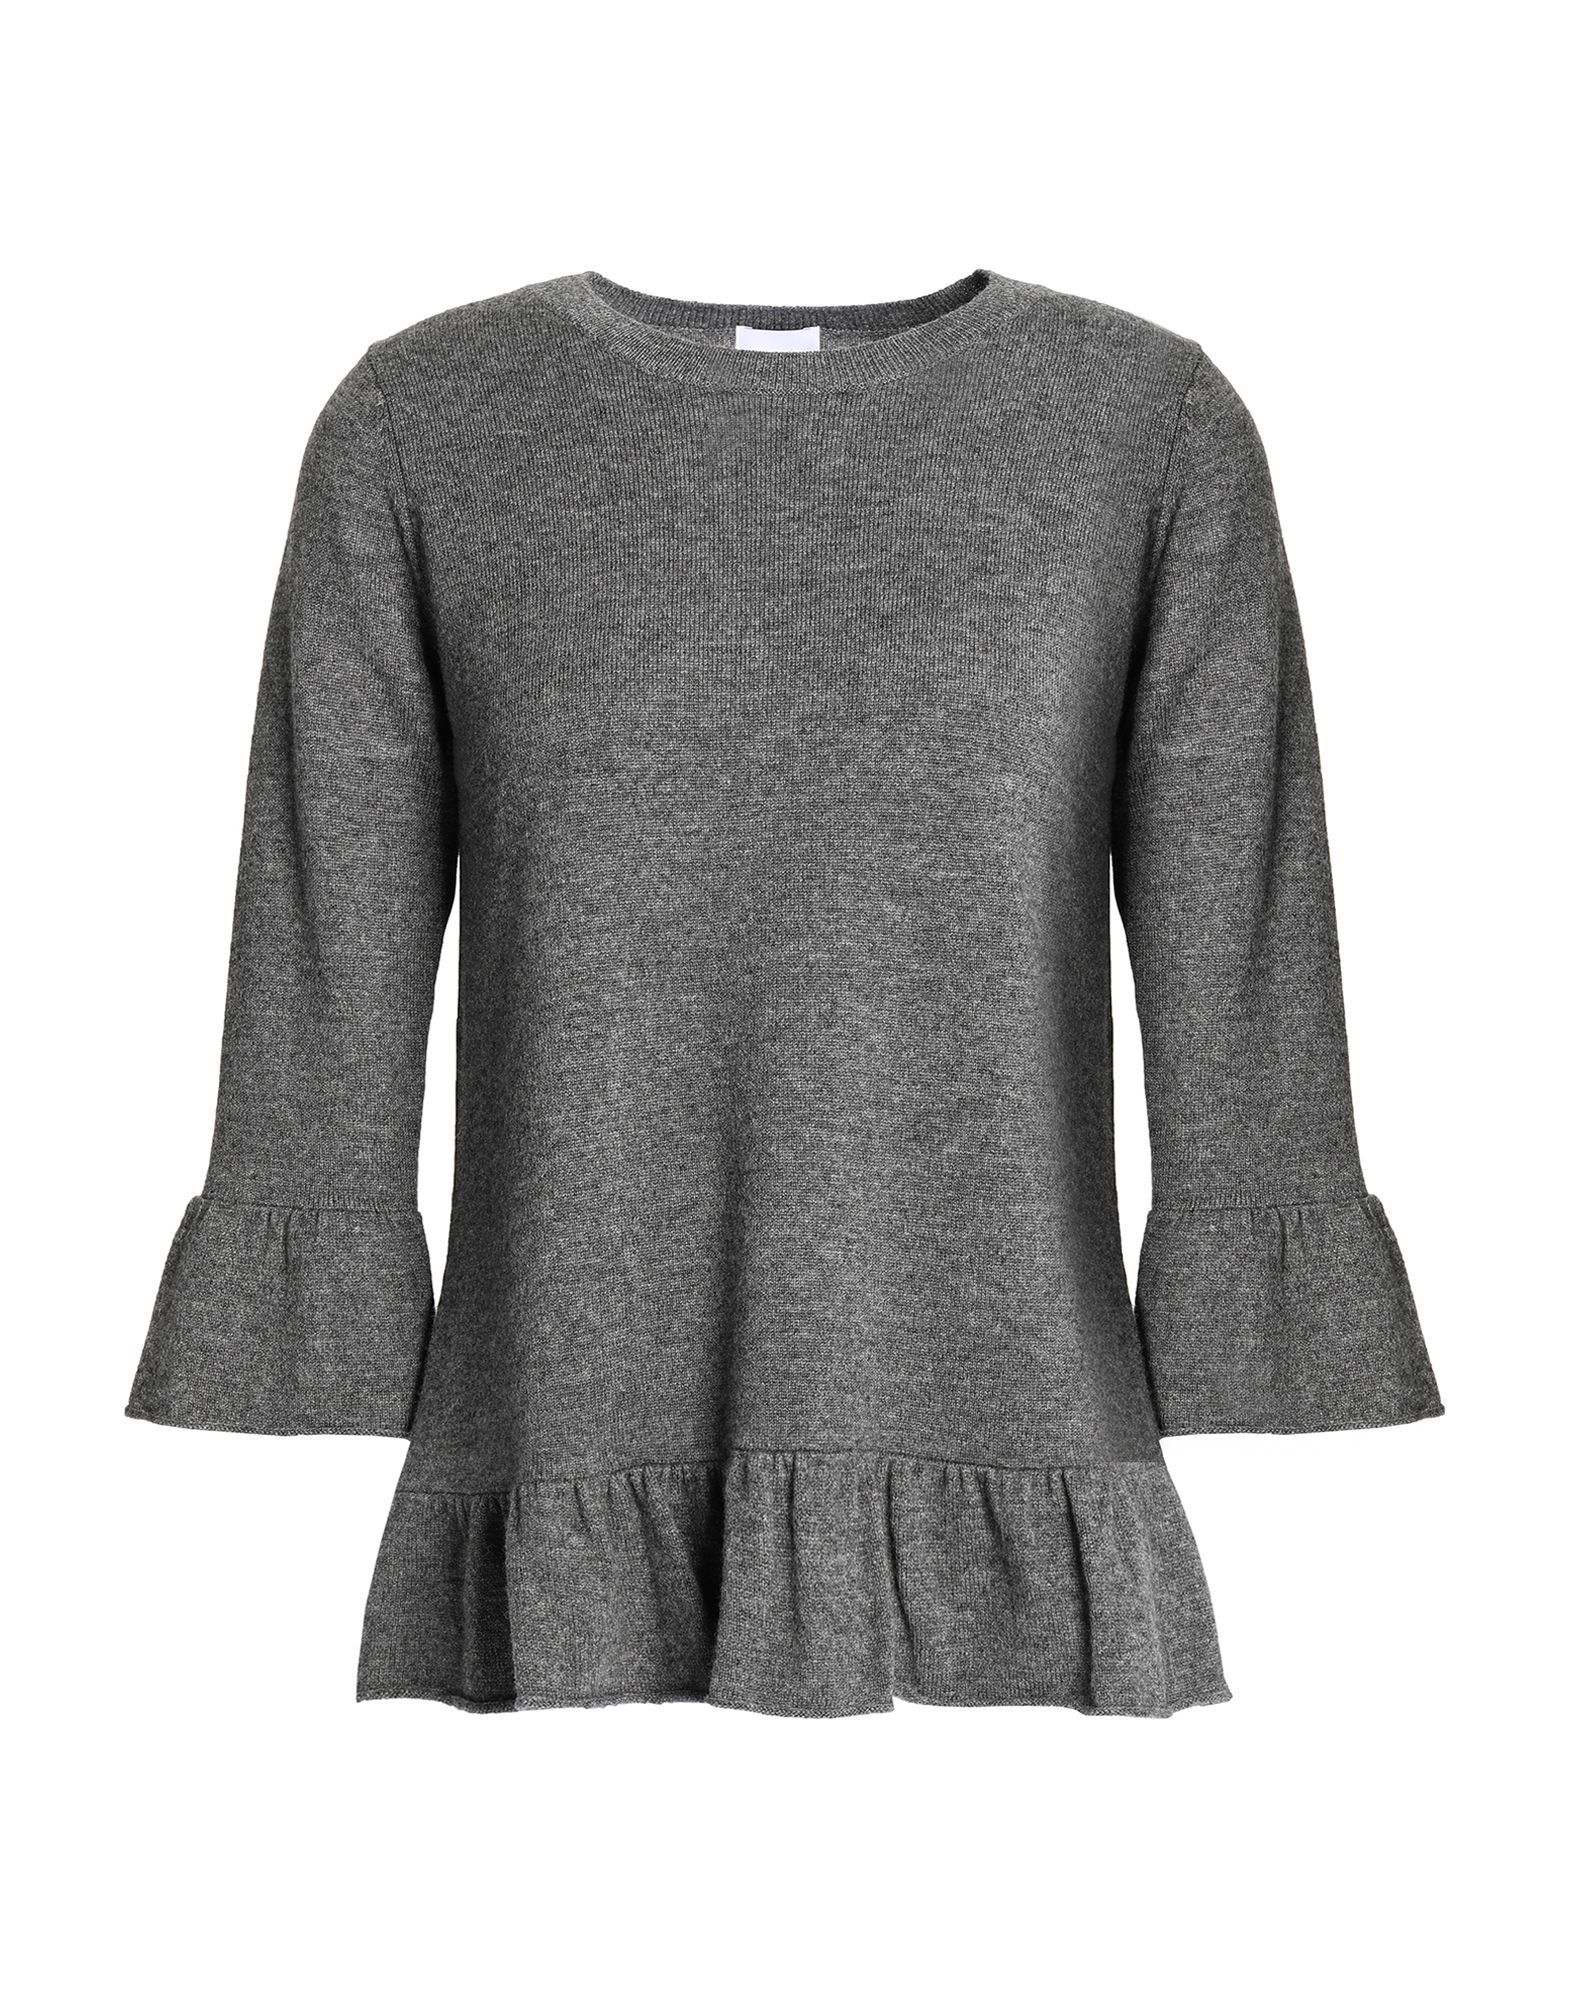 Madeleine Thompson Sweater In Lead